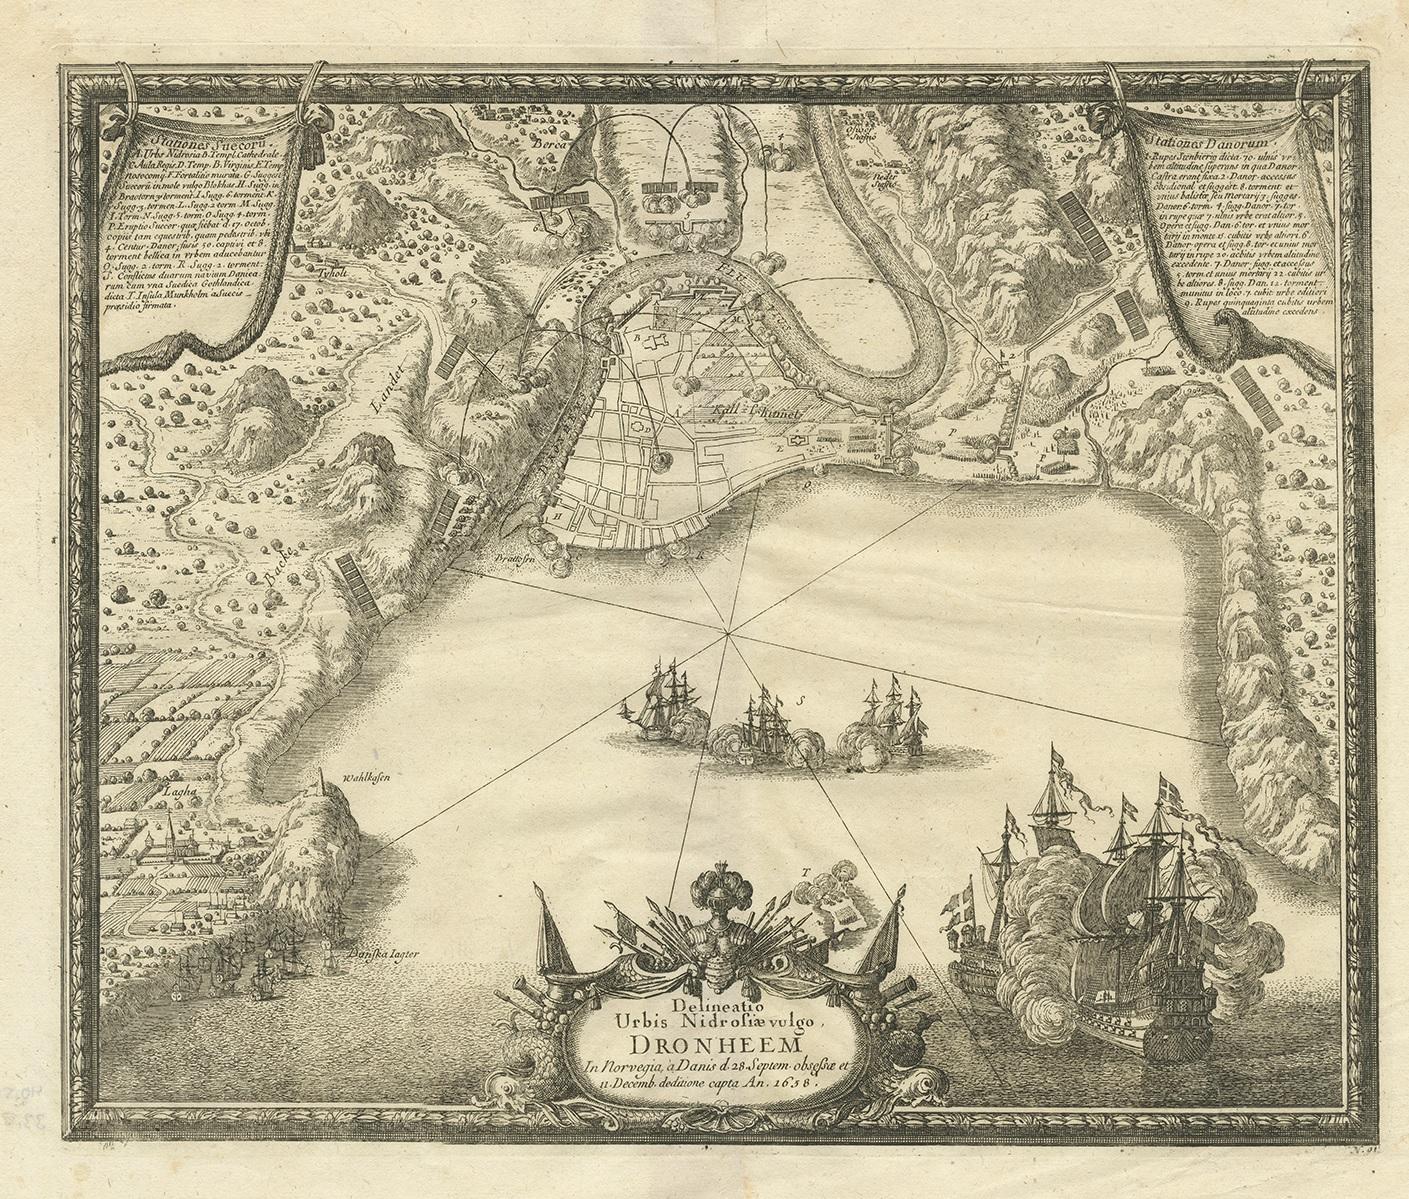 Antique print titled 'Delineatio Urbis Nidrosiae vulgo Dronheem'. This bird's-eye plan of Trondheim illustrates the attack on the city during the Dano-Swedish War. The siege began on September 28, 1658 with Dano-Norwegian forces attempting to